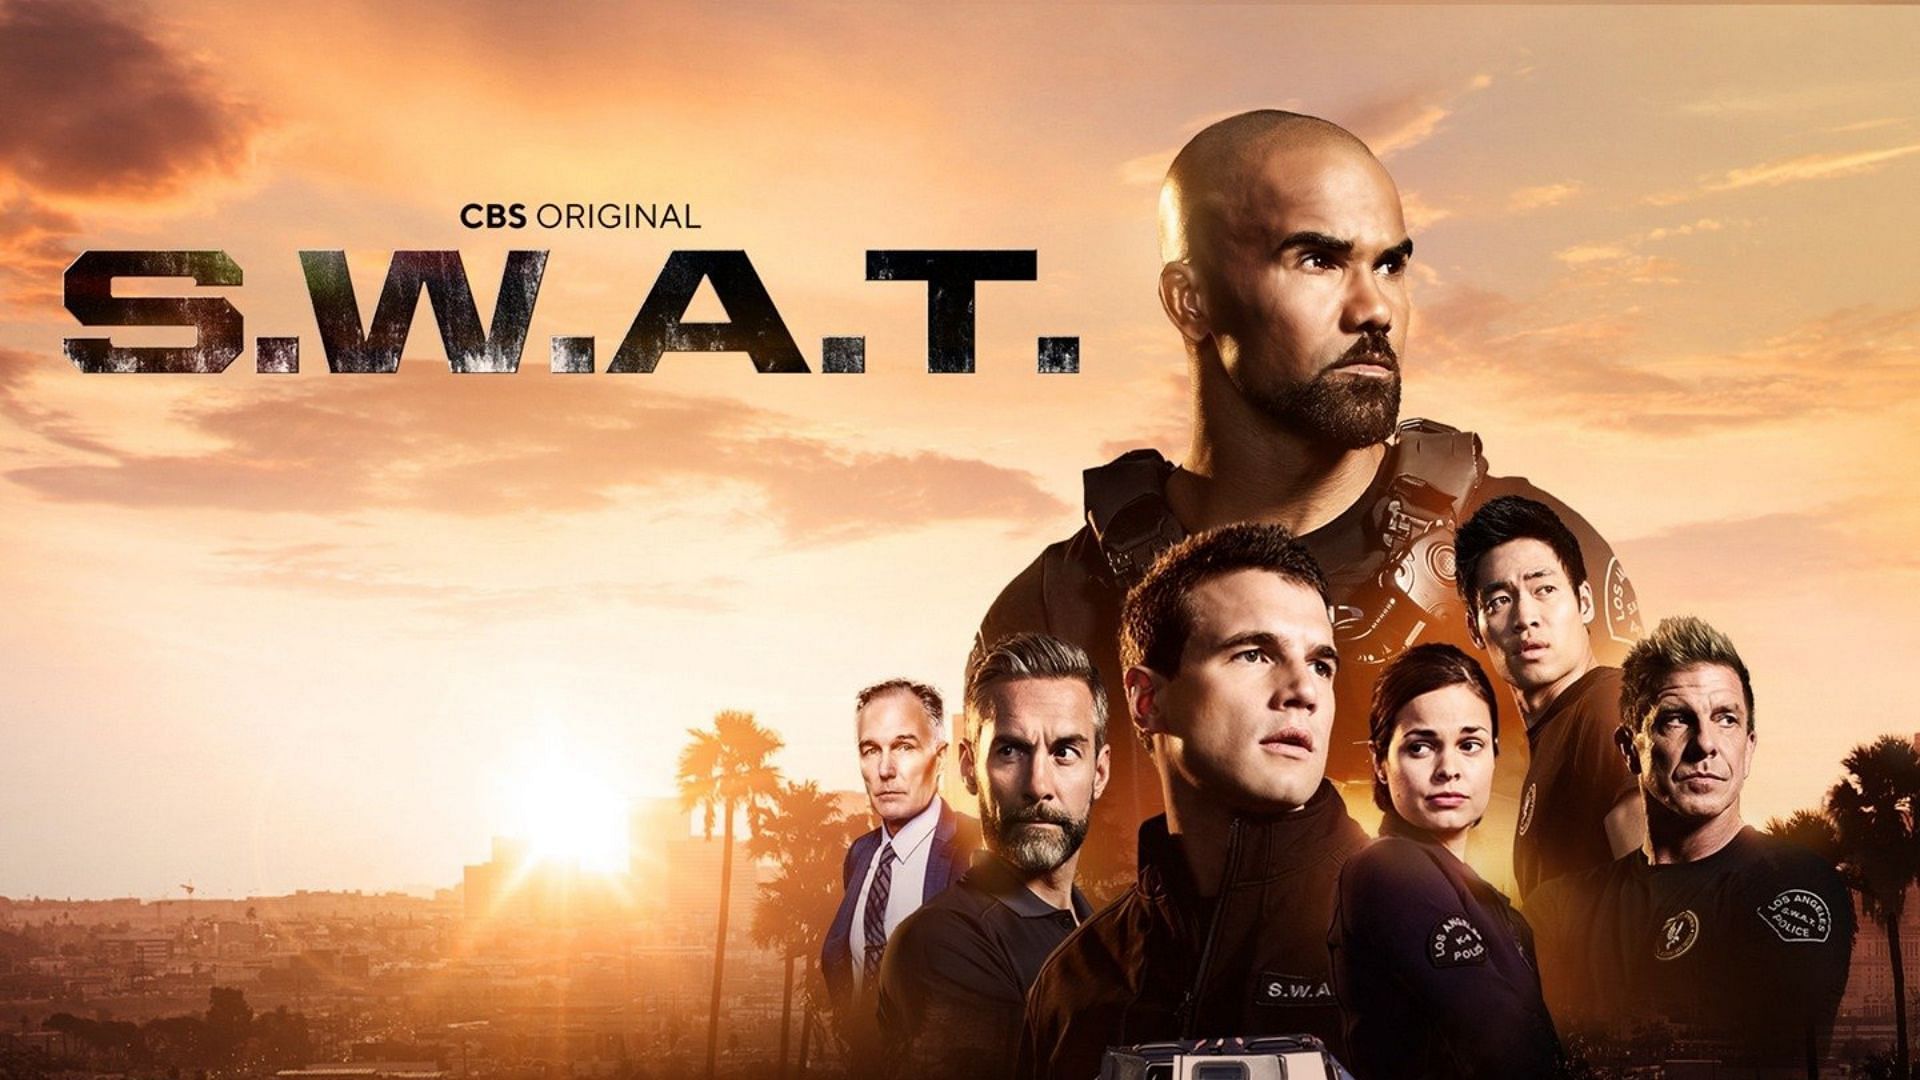 SWAT promotional poster (Image via Rotten Tomatoes)